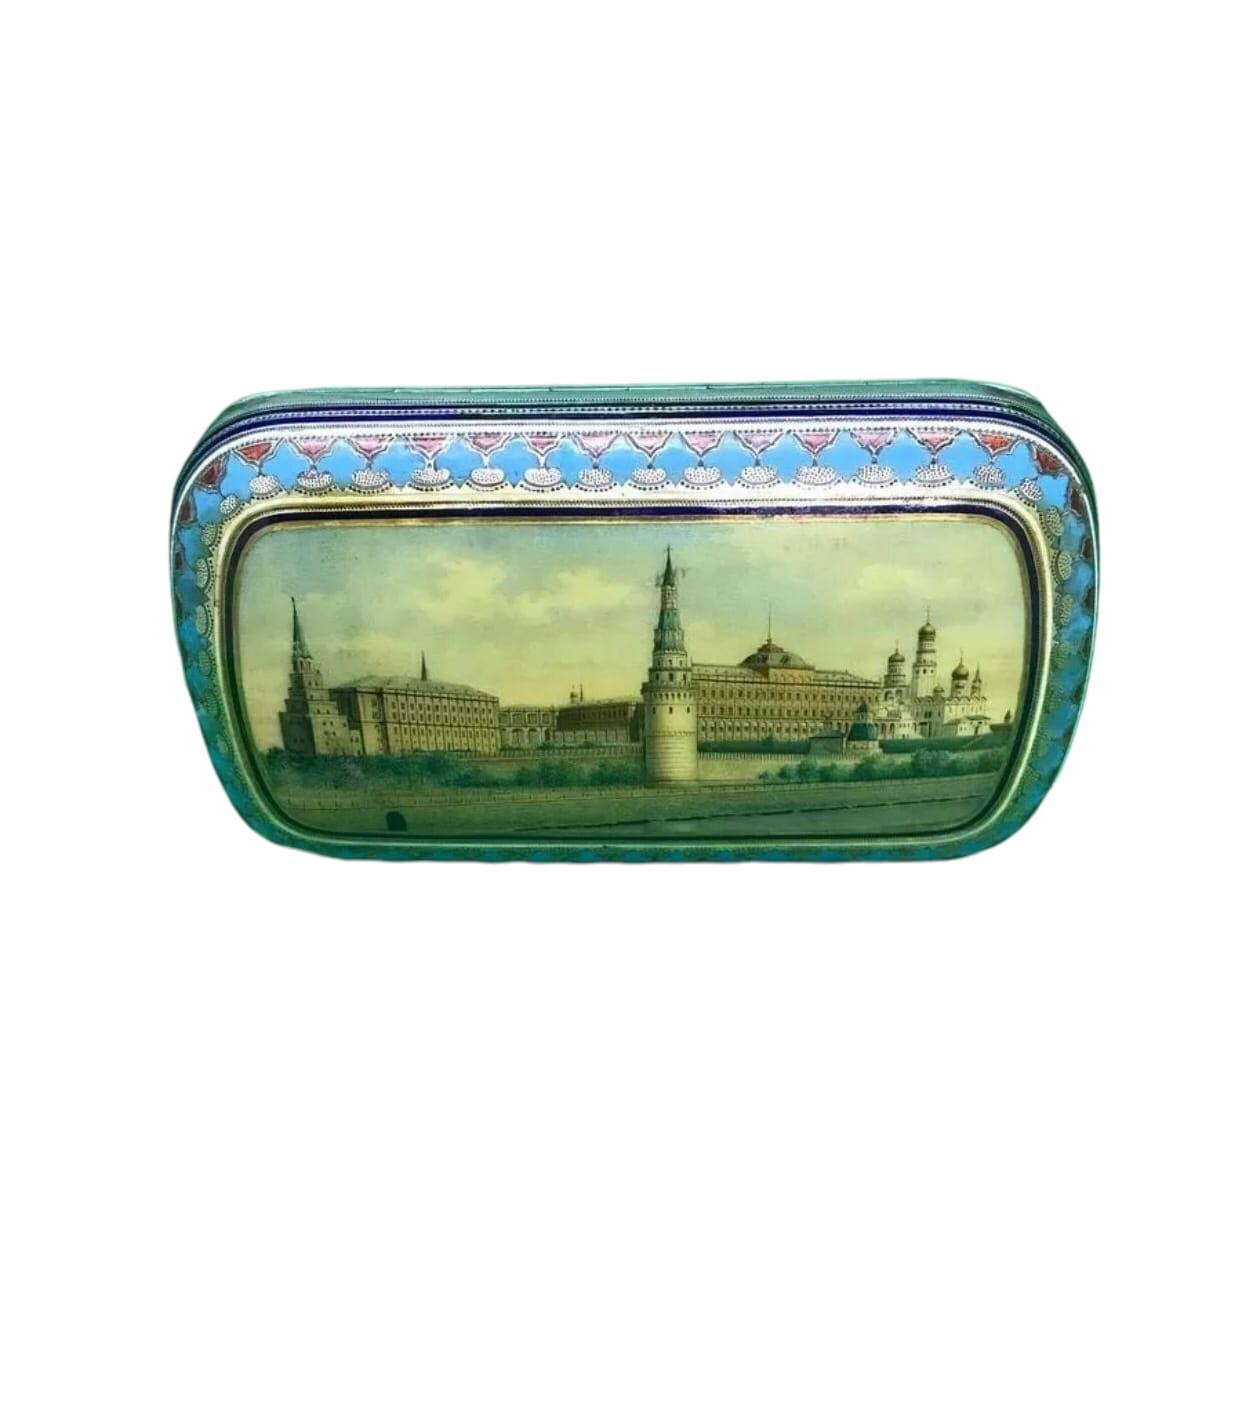 An Antique Imperial Russian Cloisonné Enamel Solid Silver Cigarette case - By well known silversmith - Image 4 of 11